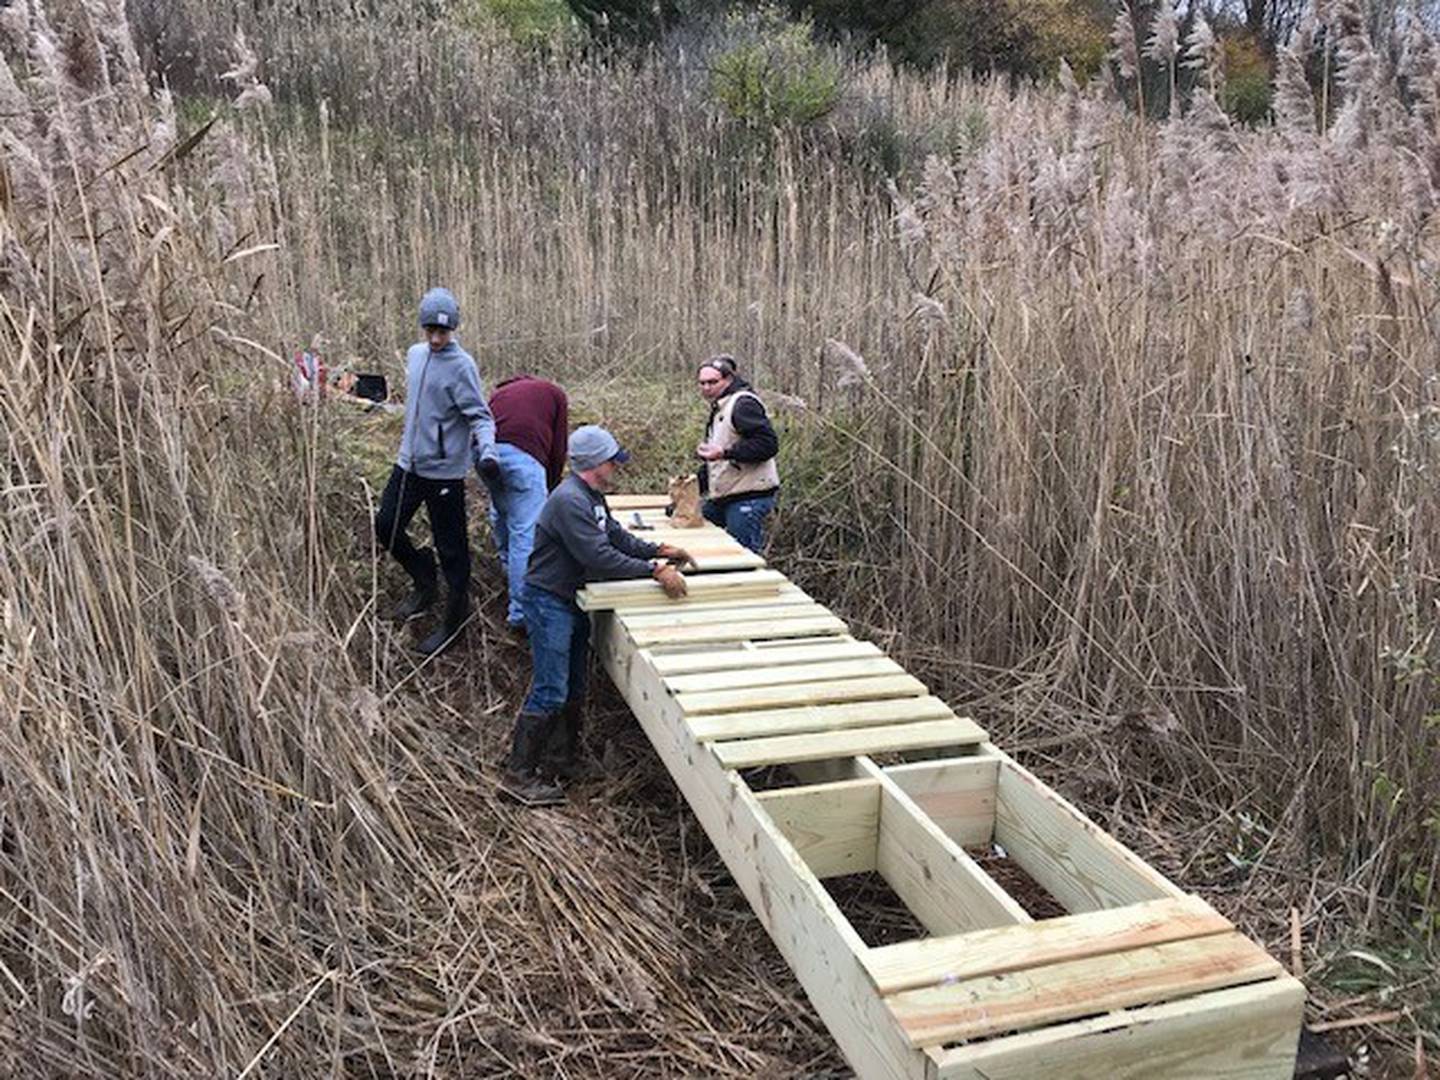 Cooper Vaske and volunteers from Boy Scout Troop 123 work on a bridge at La Salle Rotary Park.  Vaske said he and his troupe spent more than 100 hours volunteering to build the bridges for the disc golf course.